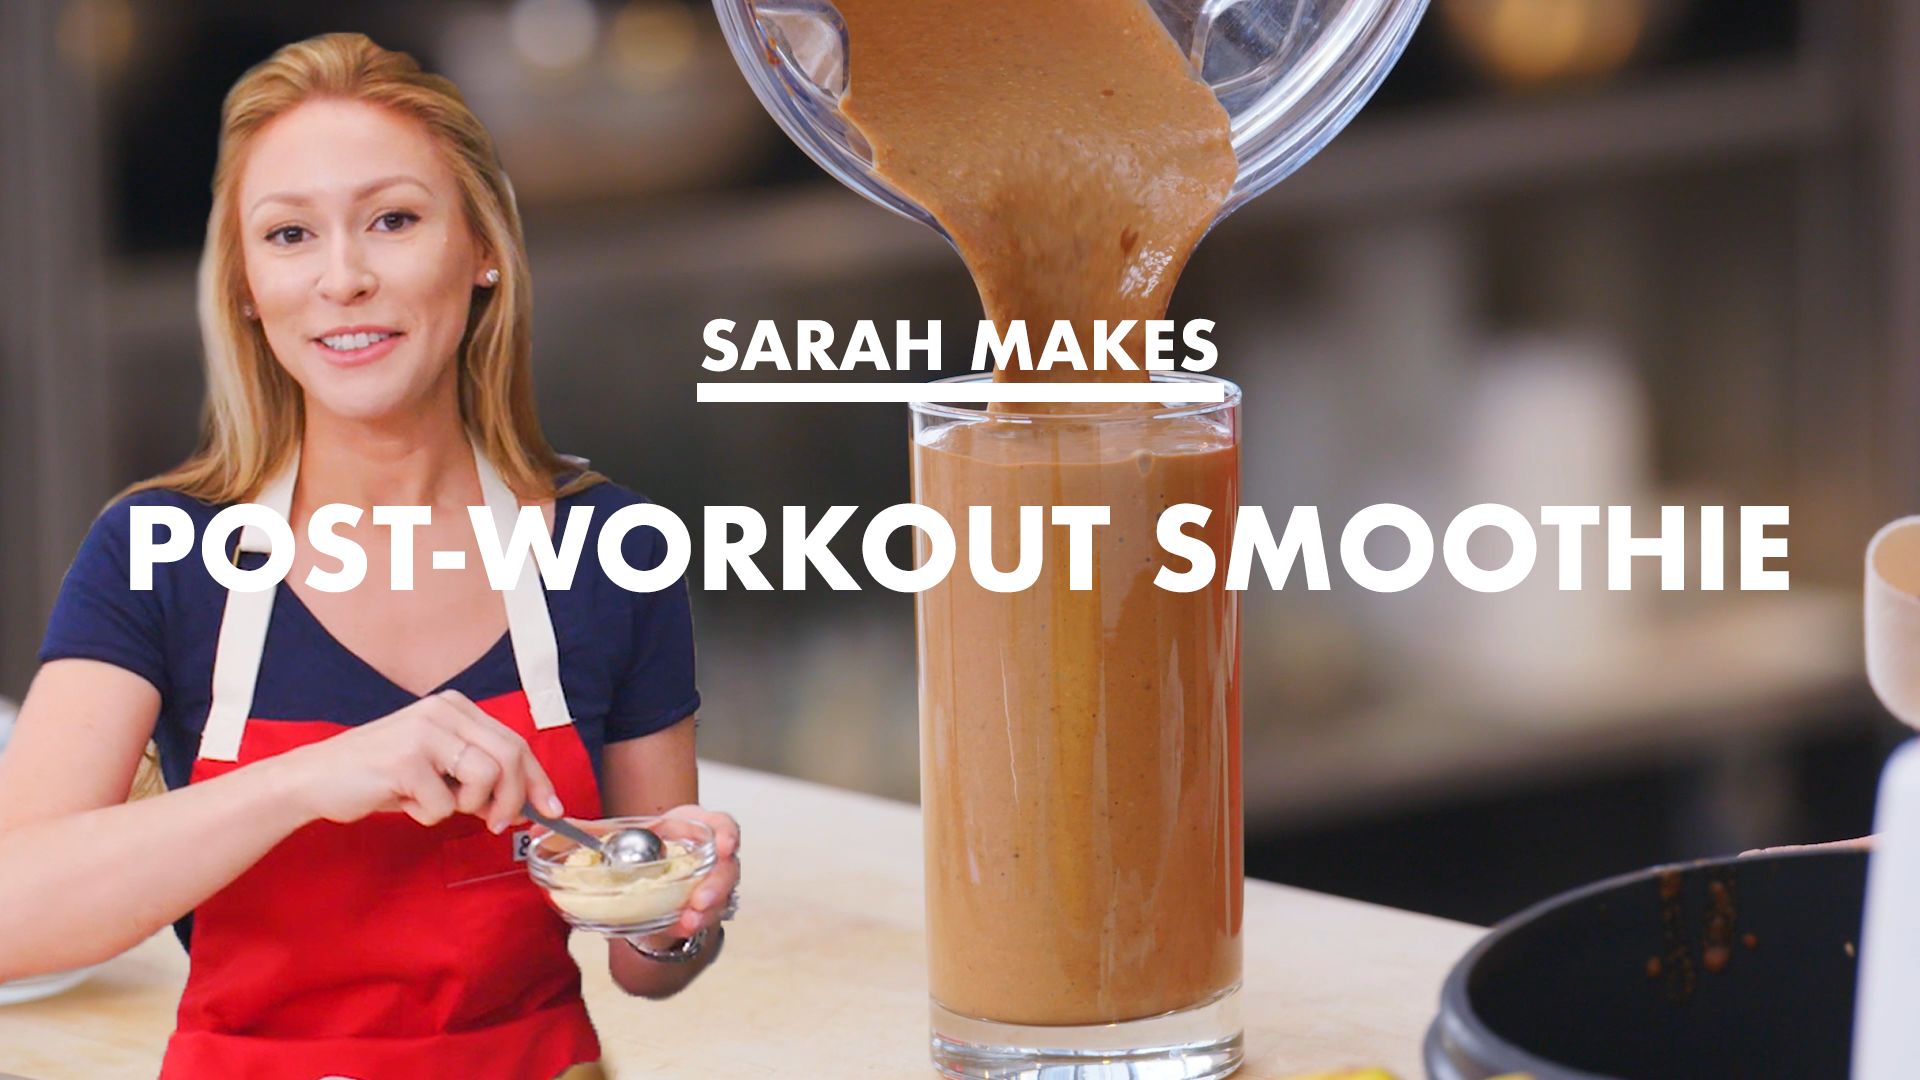 Watch Sarah Makes A Post-Workout Smoothie